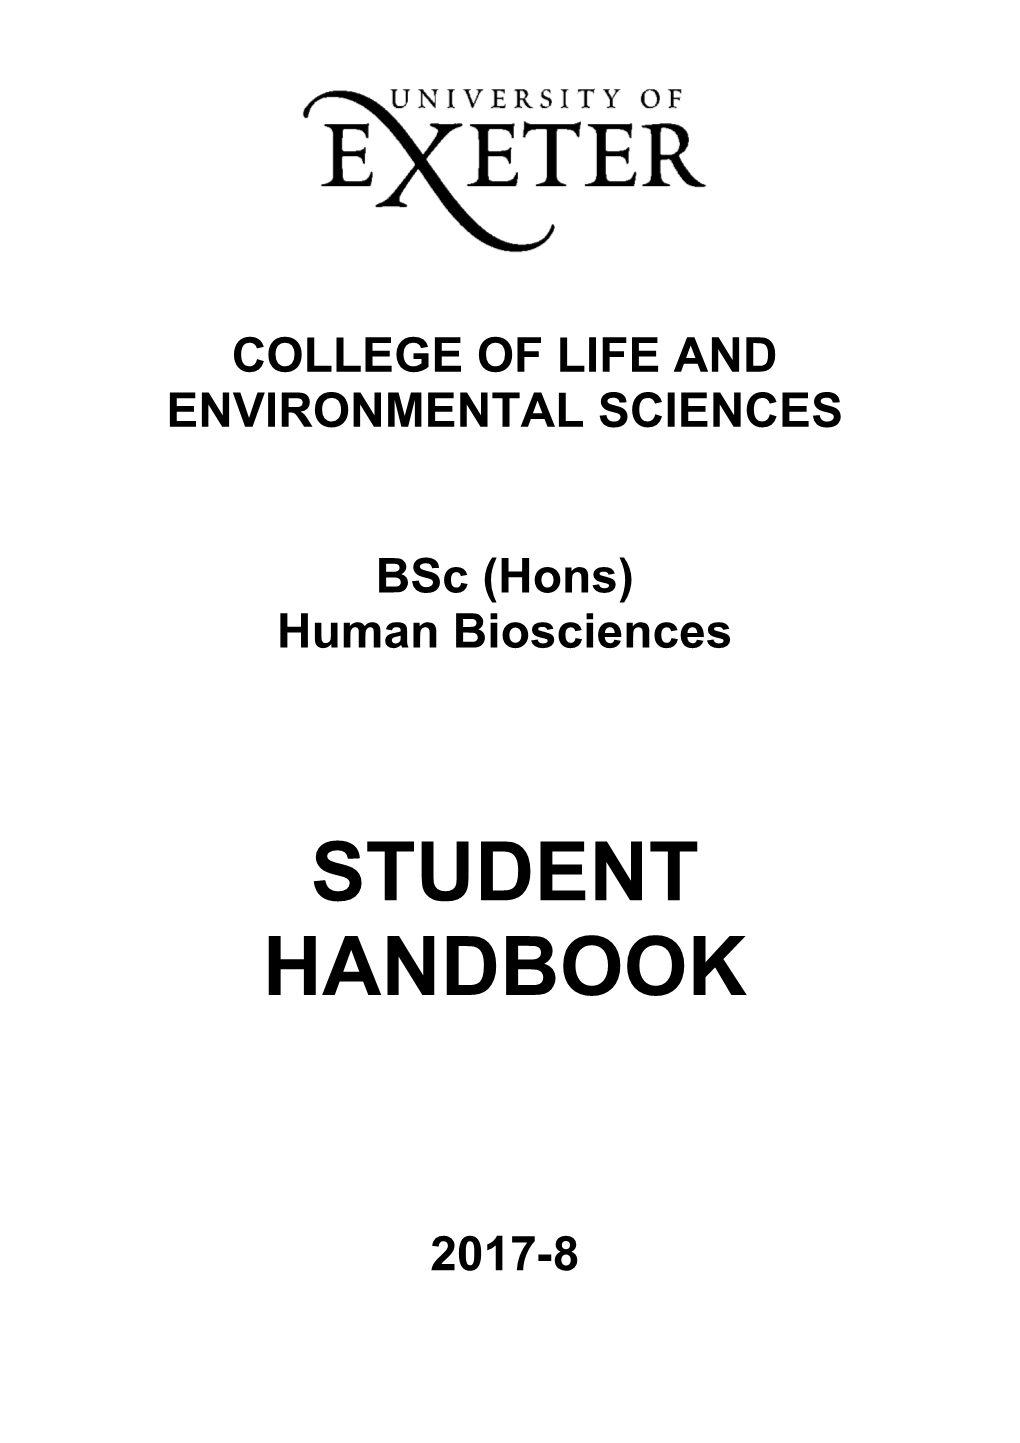 College of Life and Environmental Sciences